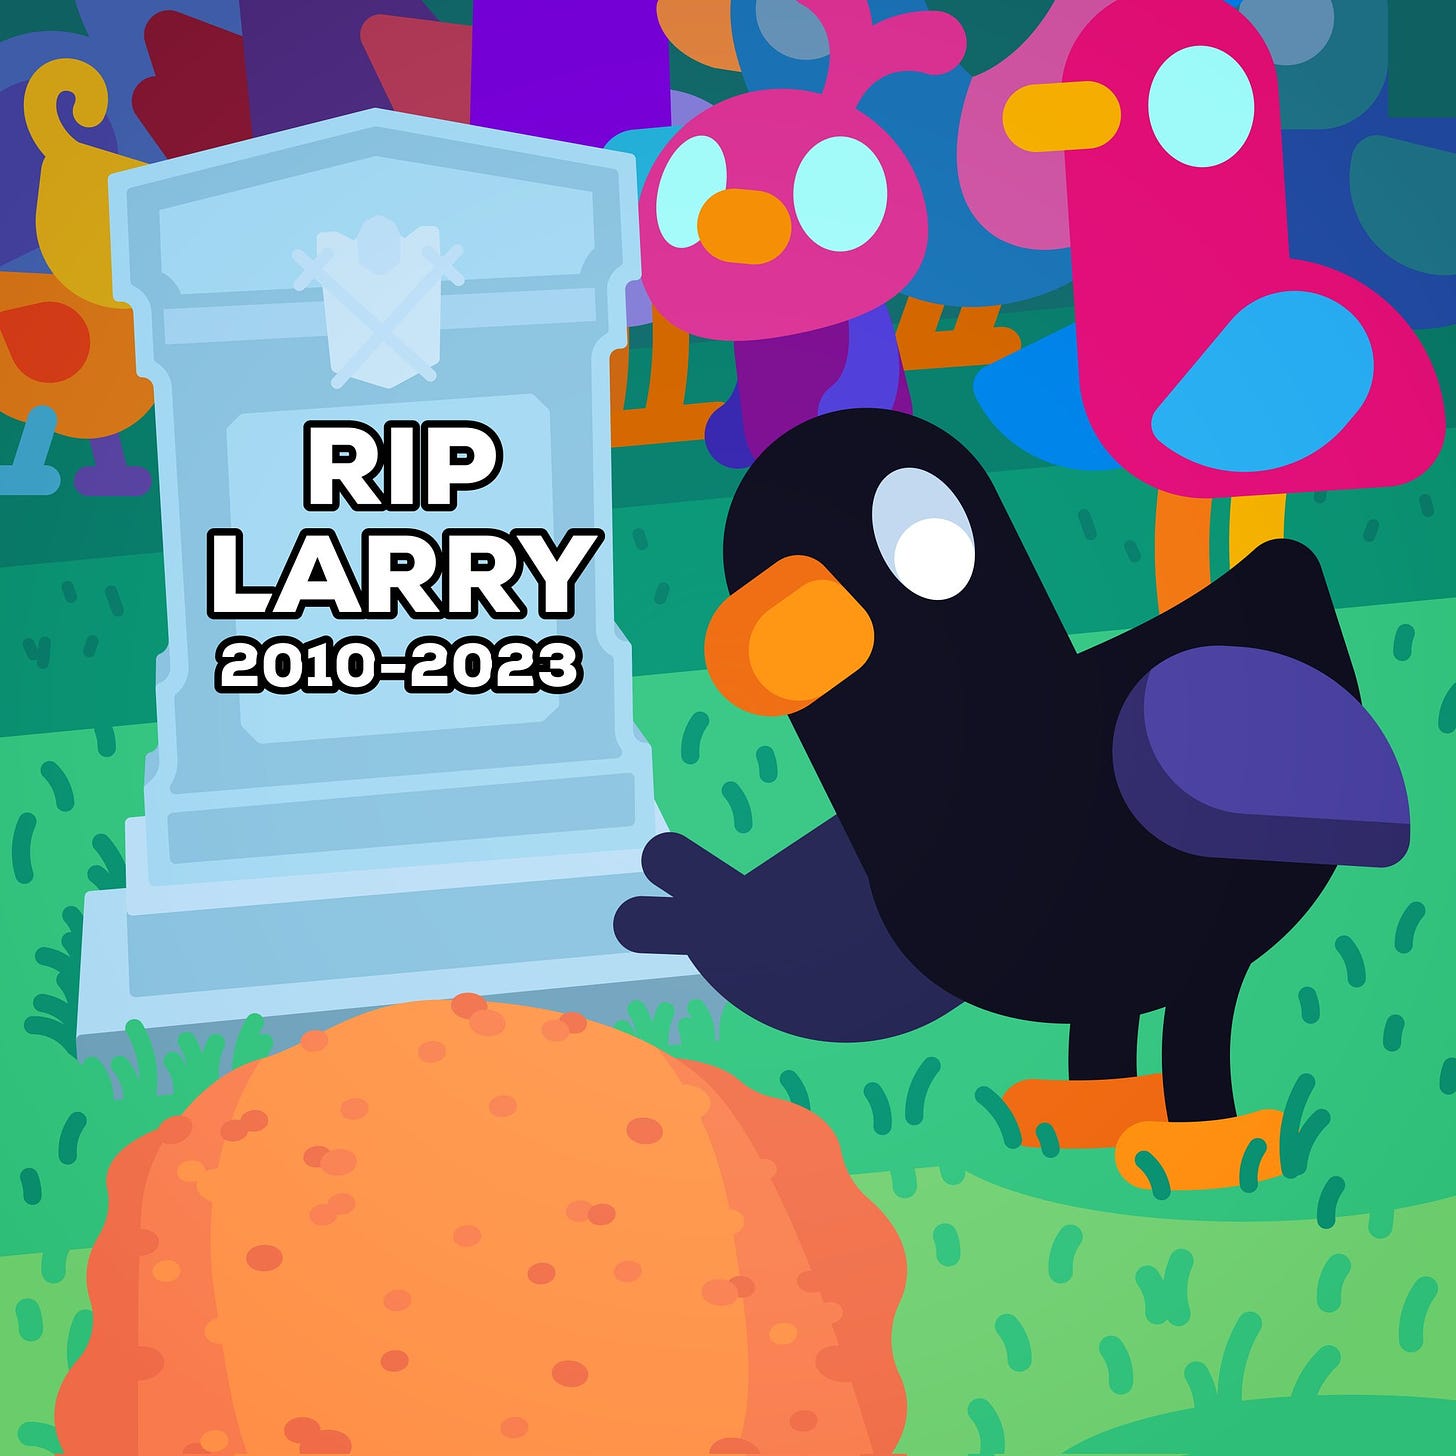 An illustration of Duck standing close to a grave with the inscription "RIP LARRY 2010 - 2023", referencing the change of Twitter to X and therfore retiring their bird icon called Larry. 